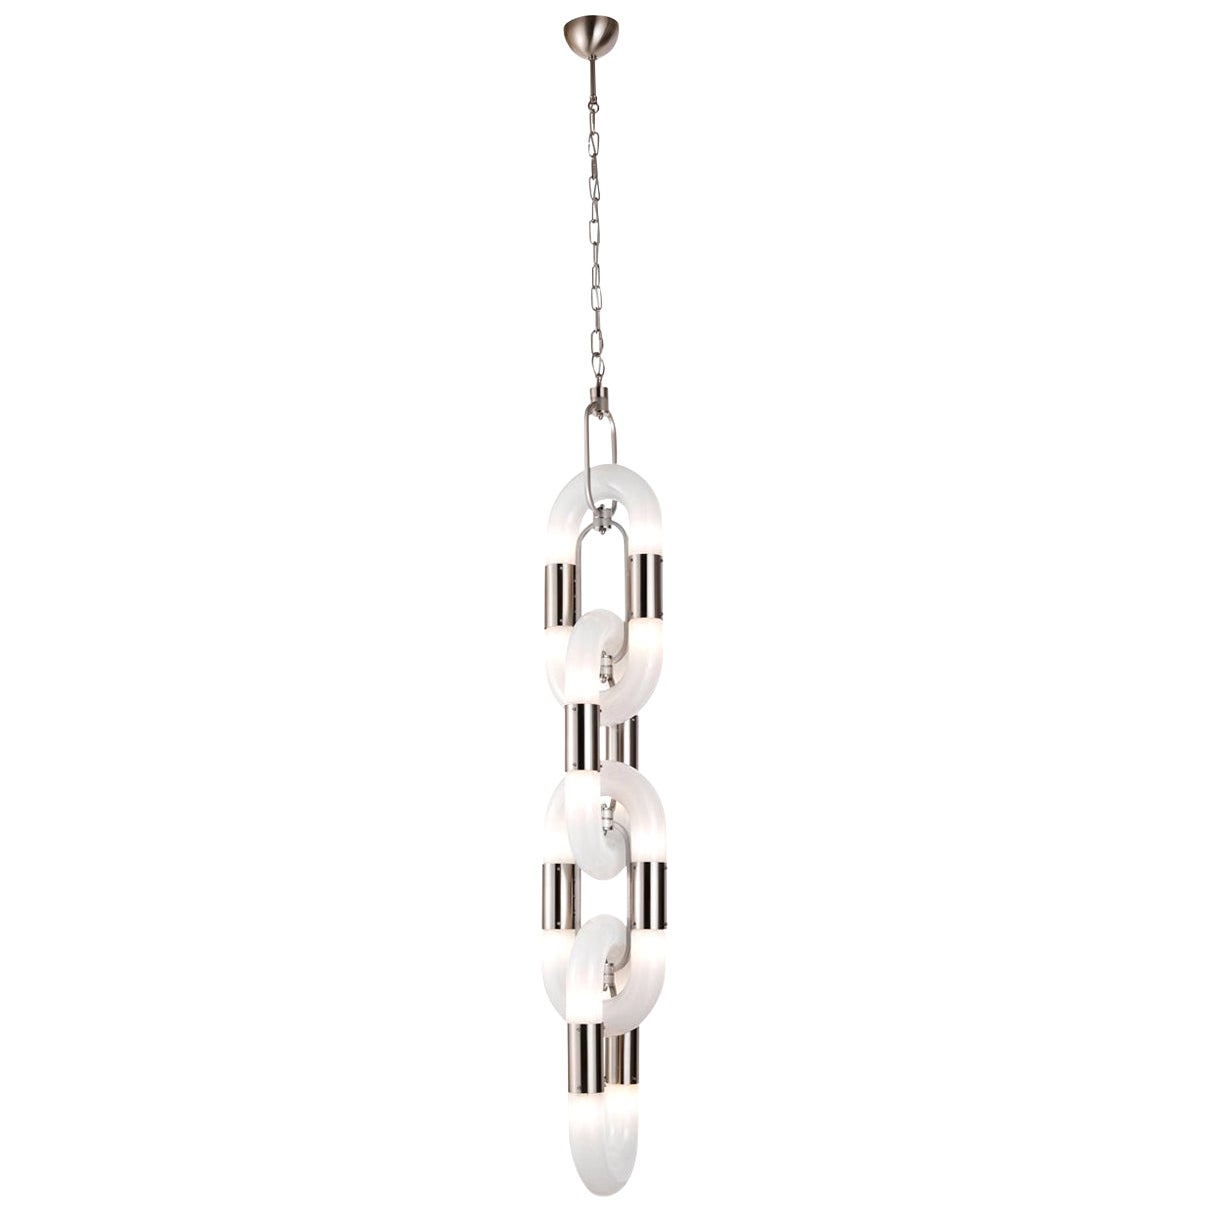 Chain Nickel 4-Link Pendant Lamp For Sale